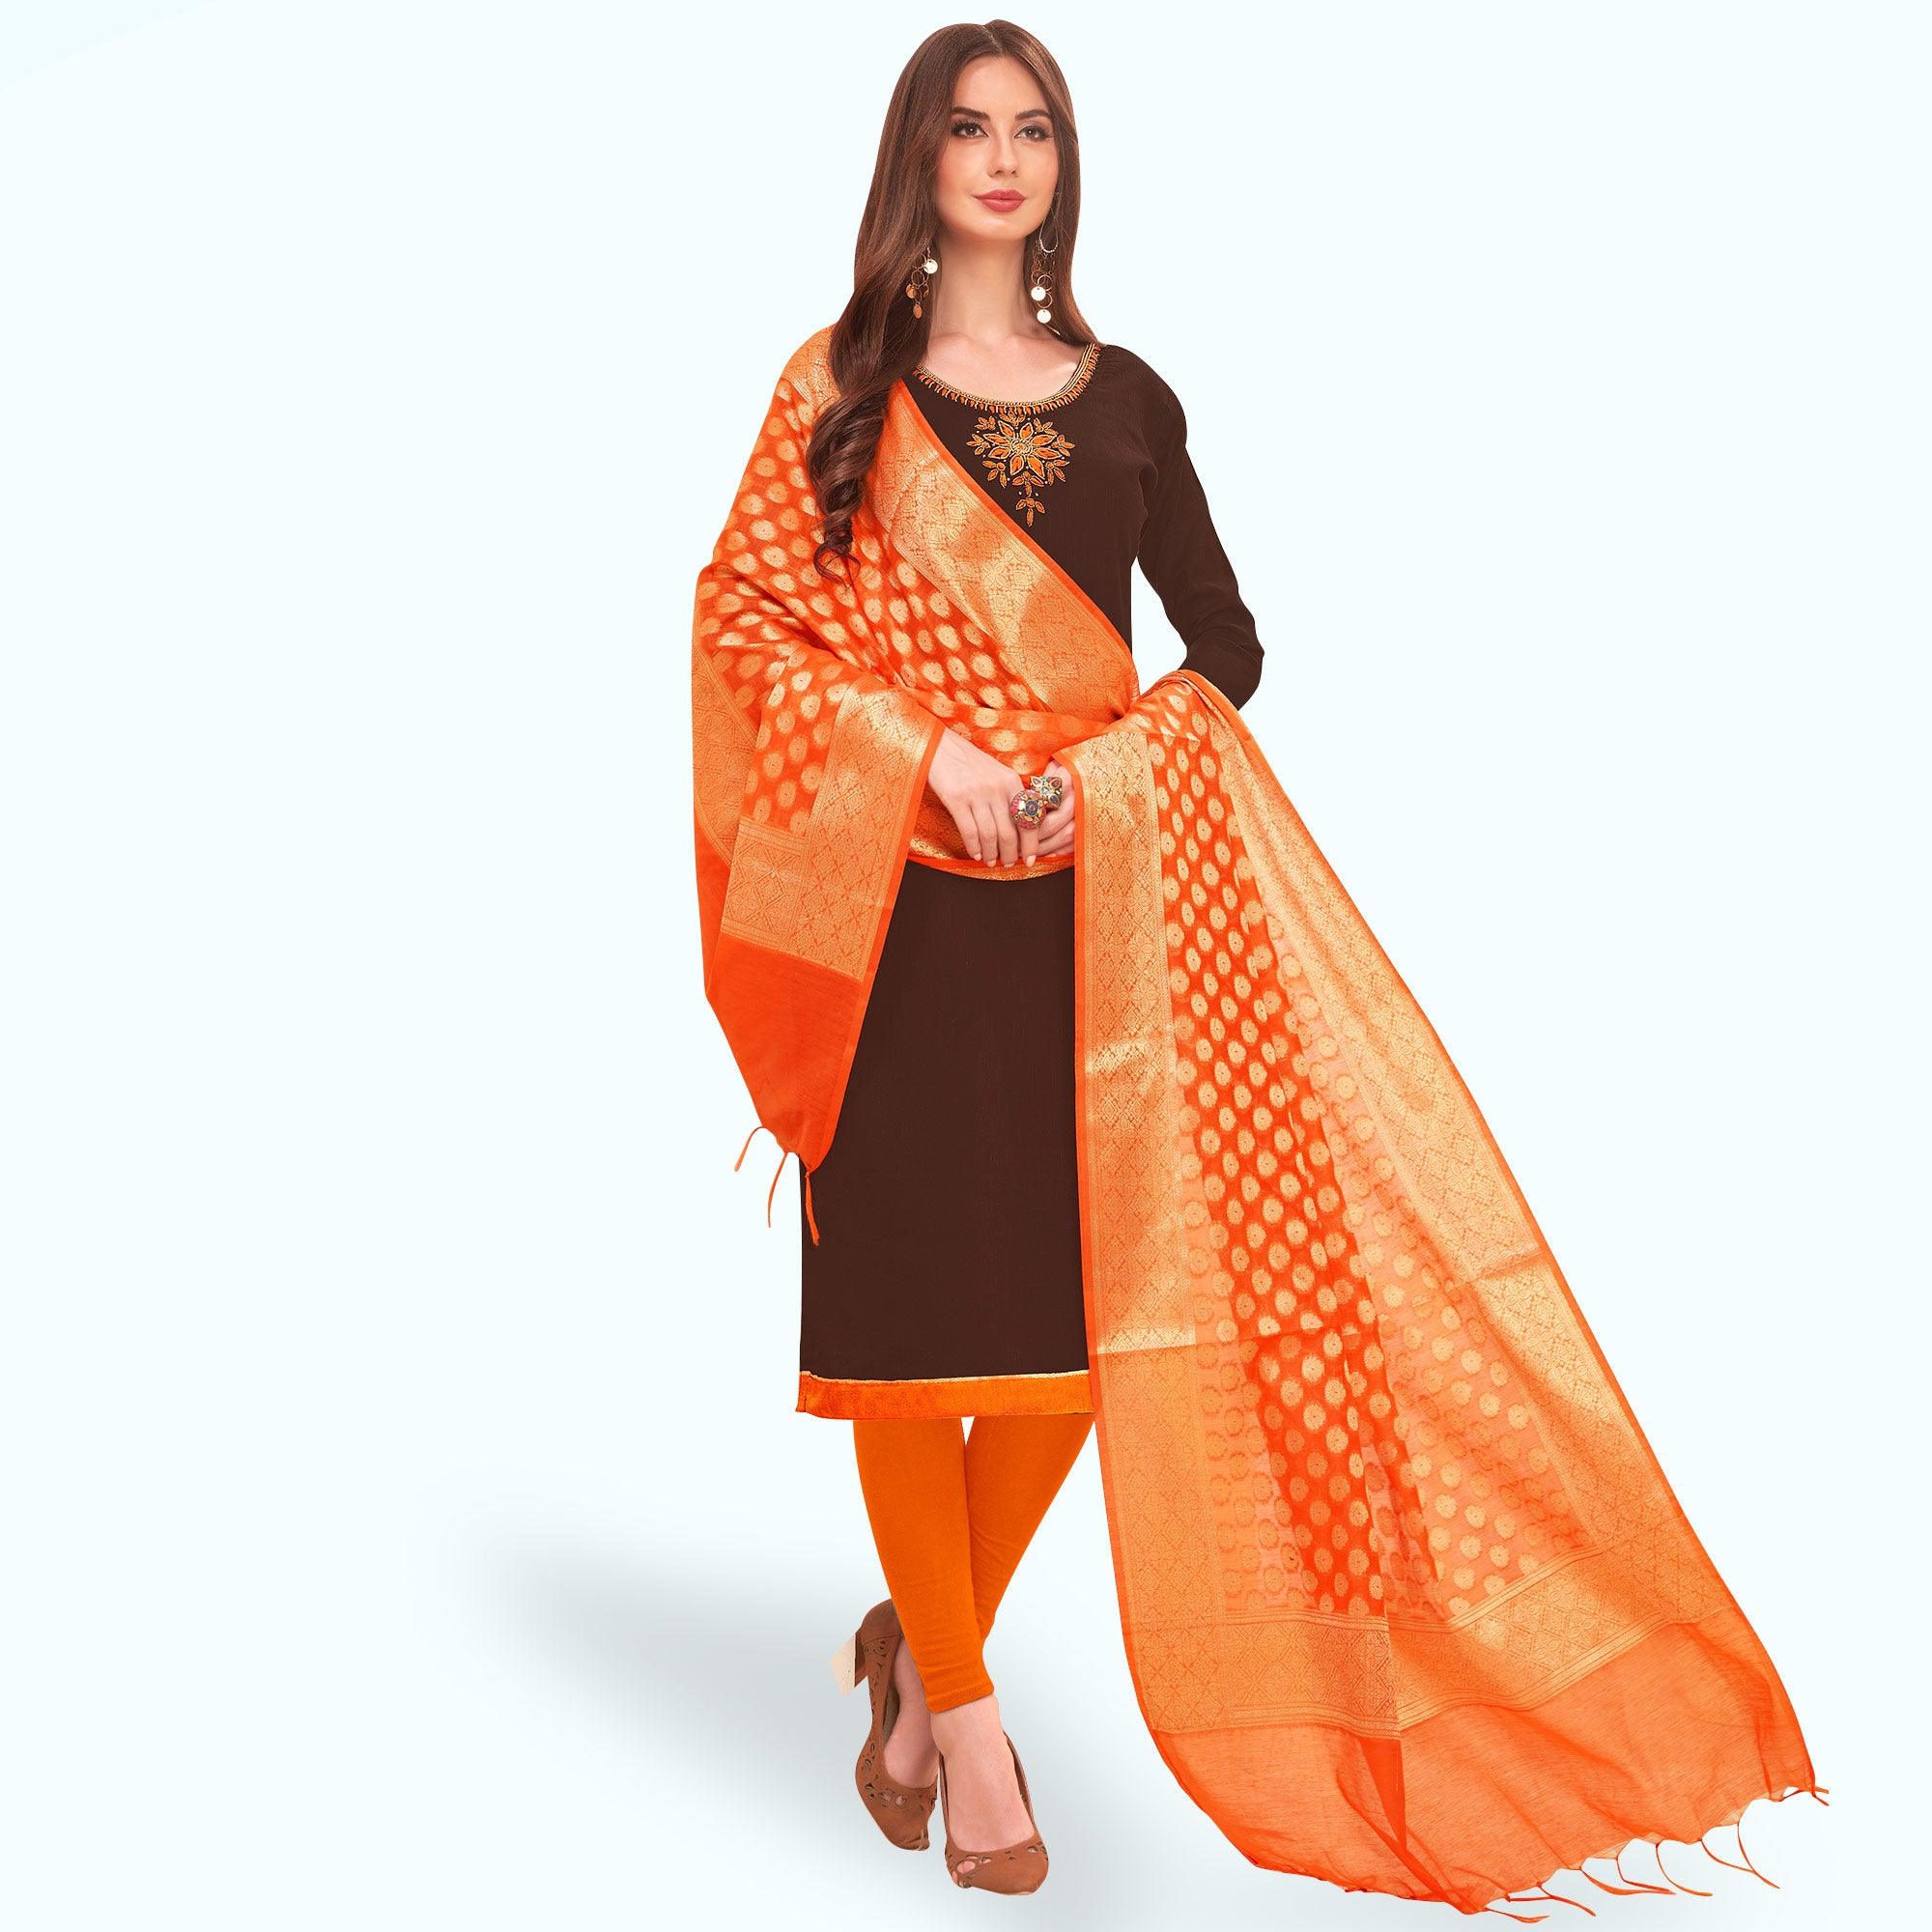 Pleasant Brown Colored Casual Wear Embroidered Cotton Dress Material With Banarasi Silk Dupatta - Peachmode